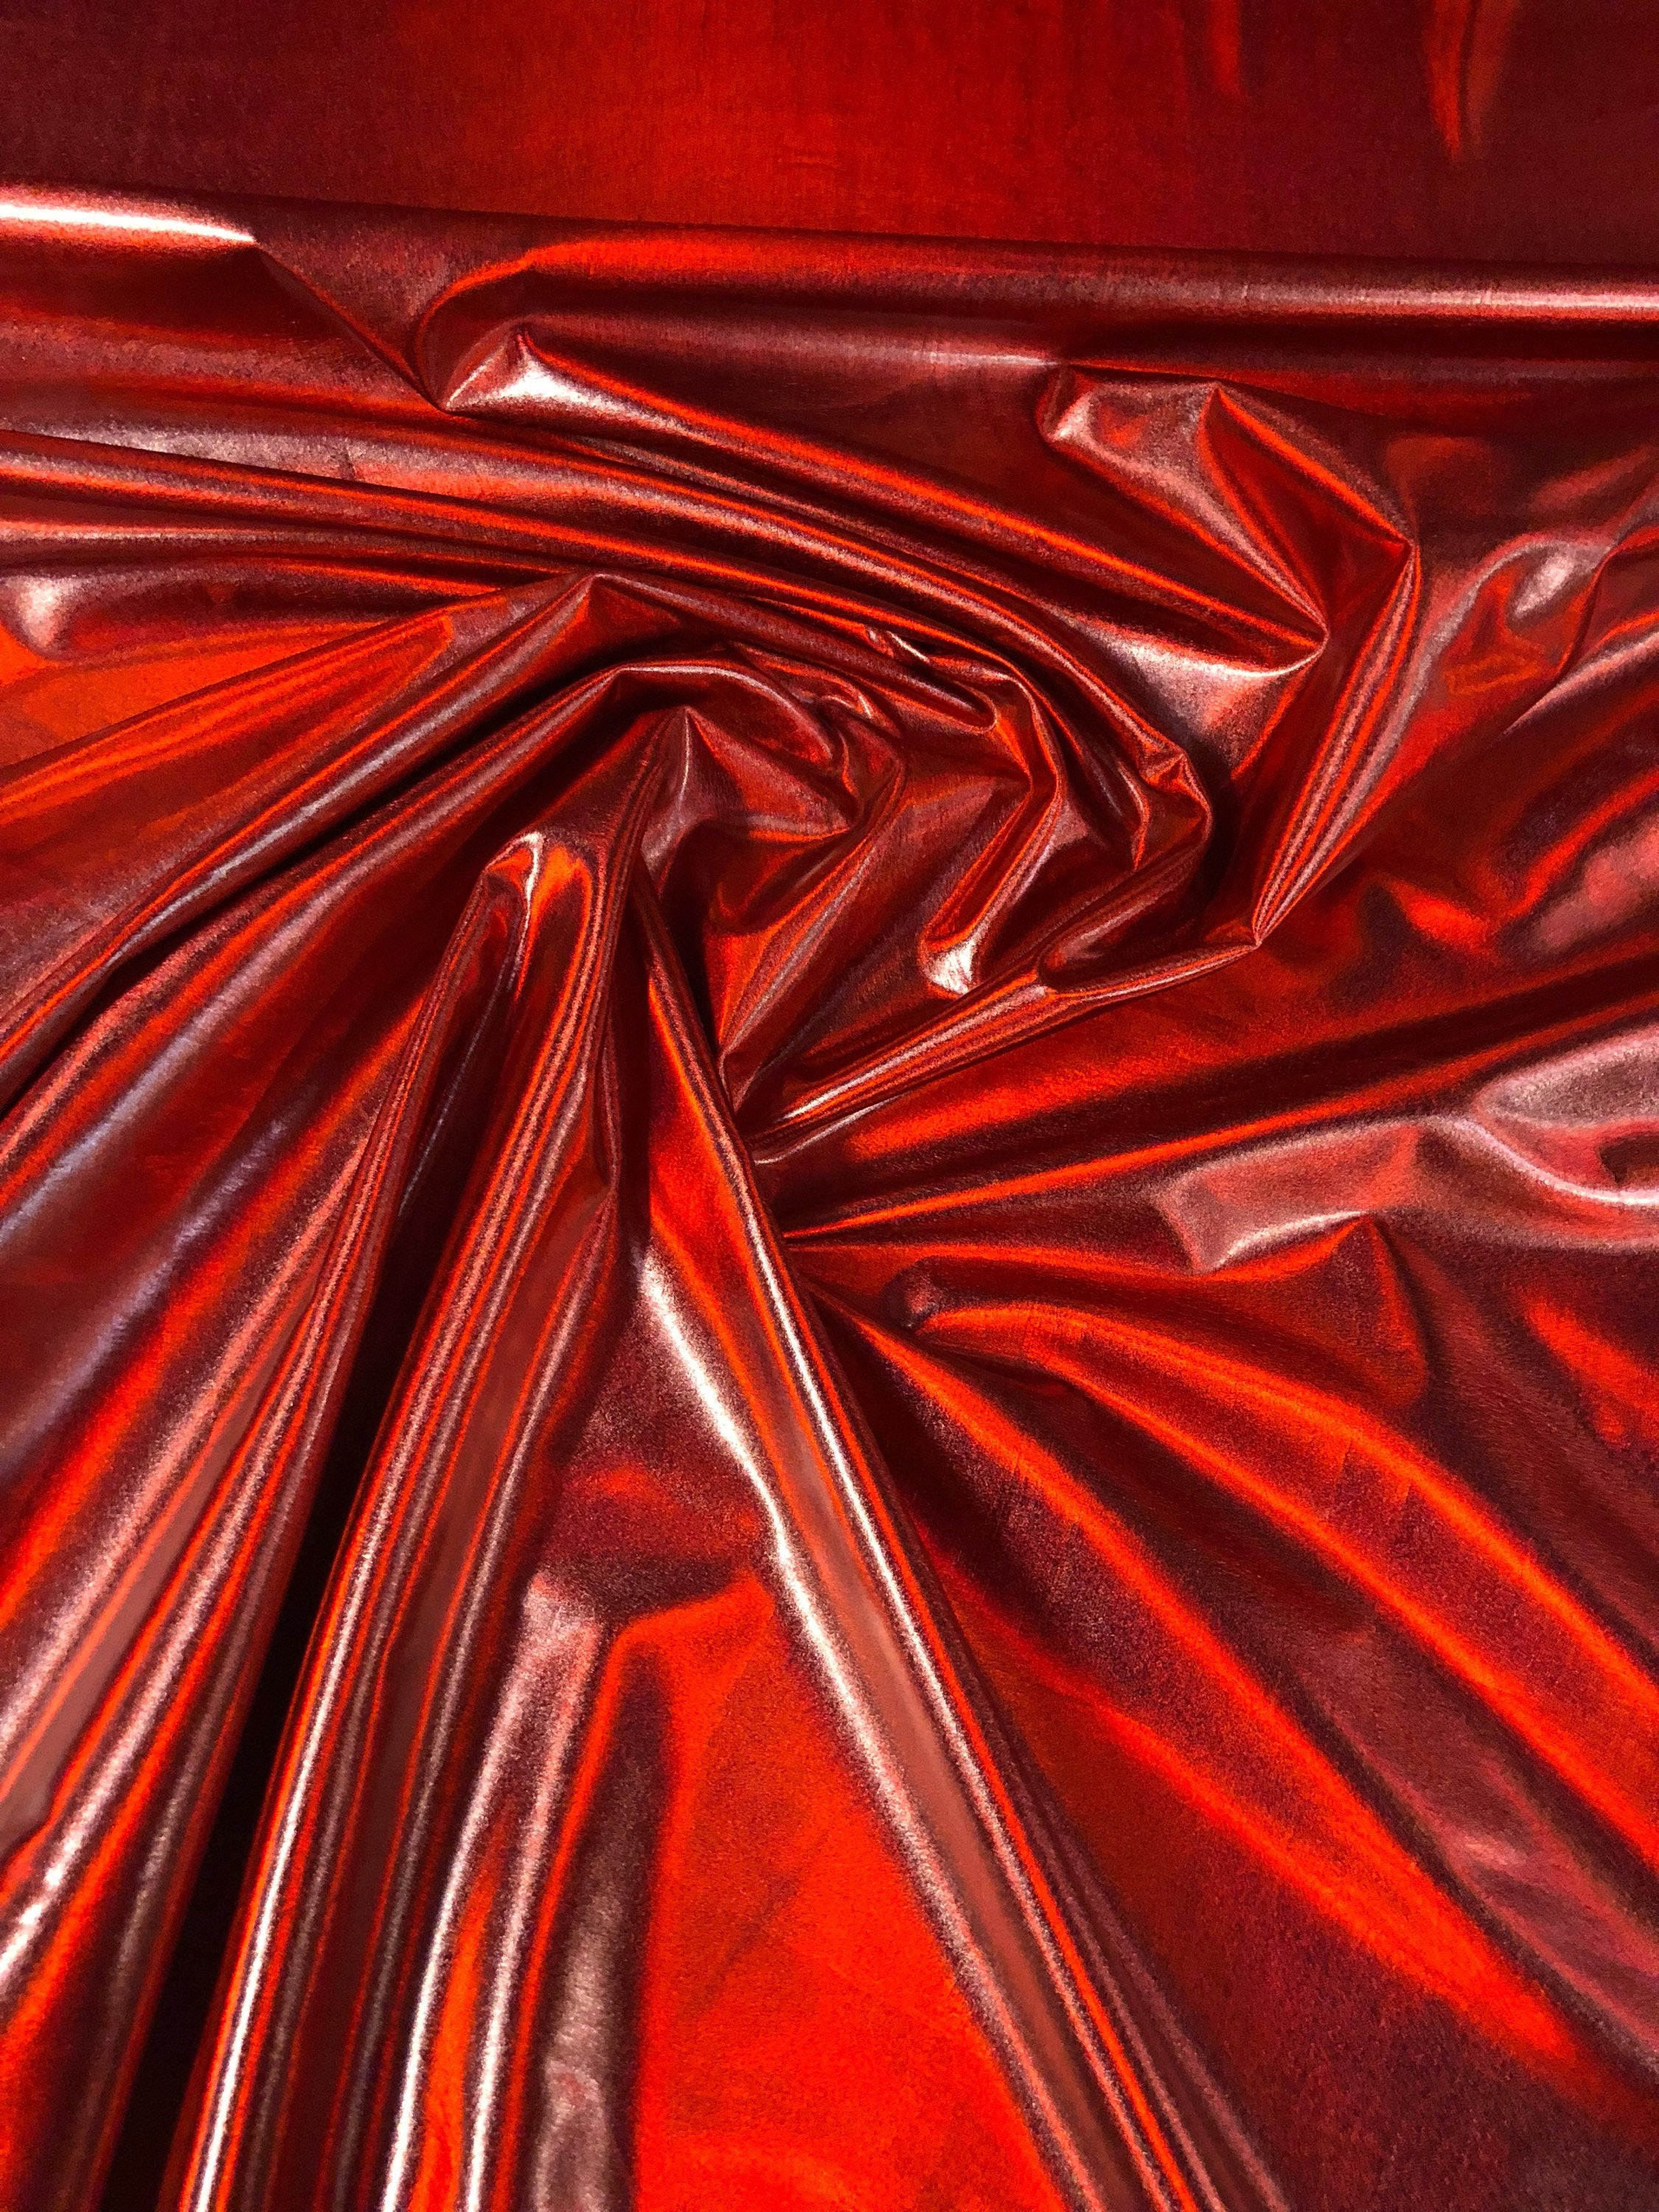 New Iridescent Red All Over Foil Metallic Nylon Spandex 4way Stretch 58/60  Sold Bu the YD. Ships Worldwide From Los Angeles California USA 